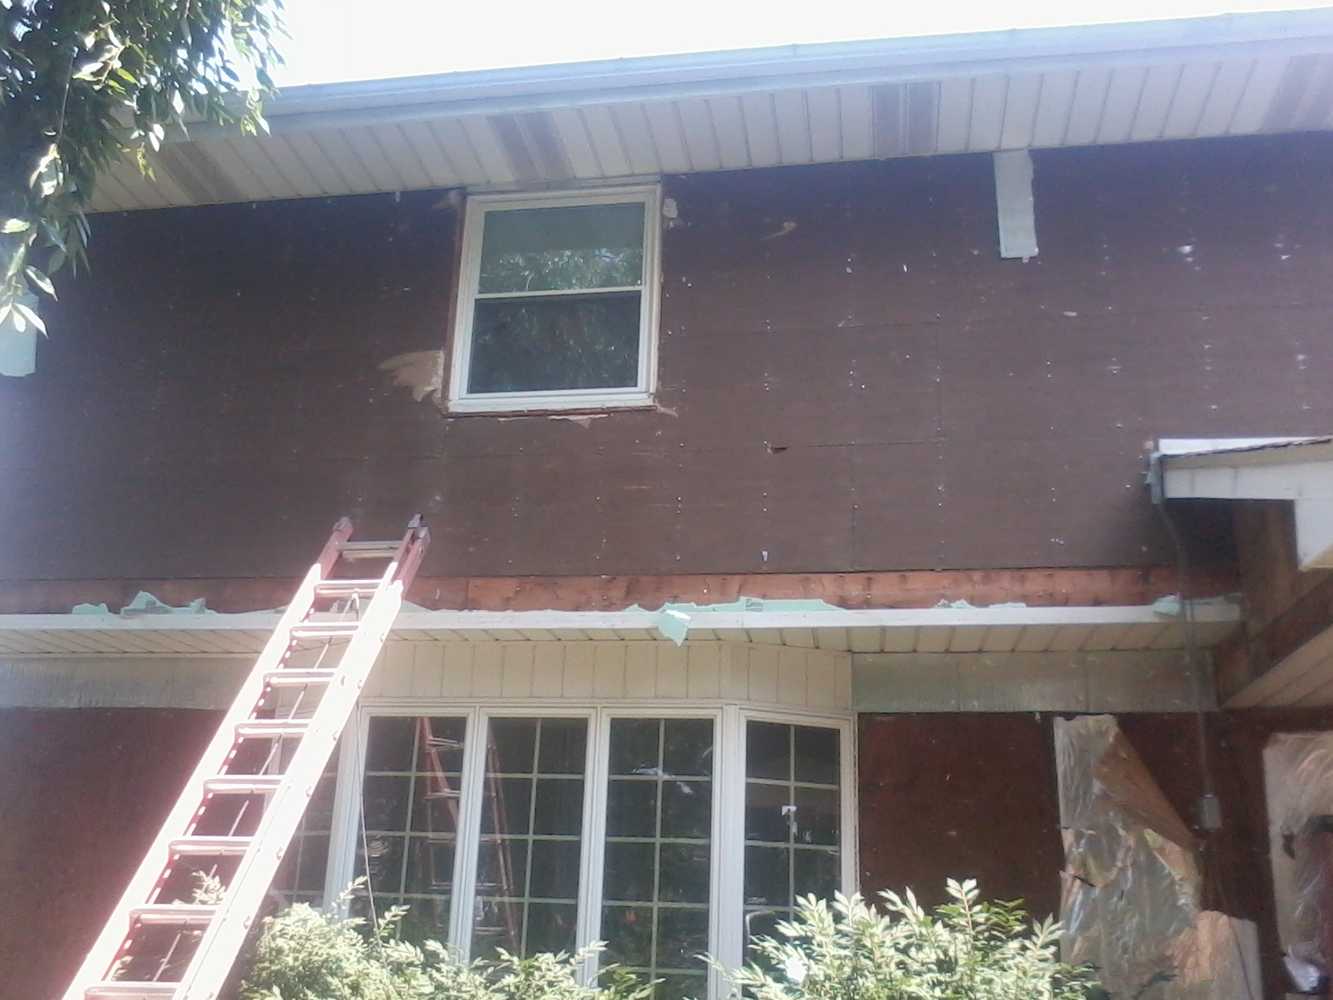 Installing stone and stucco